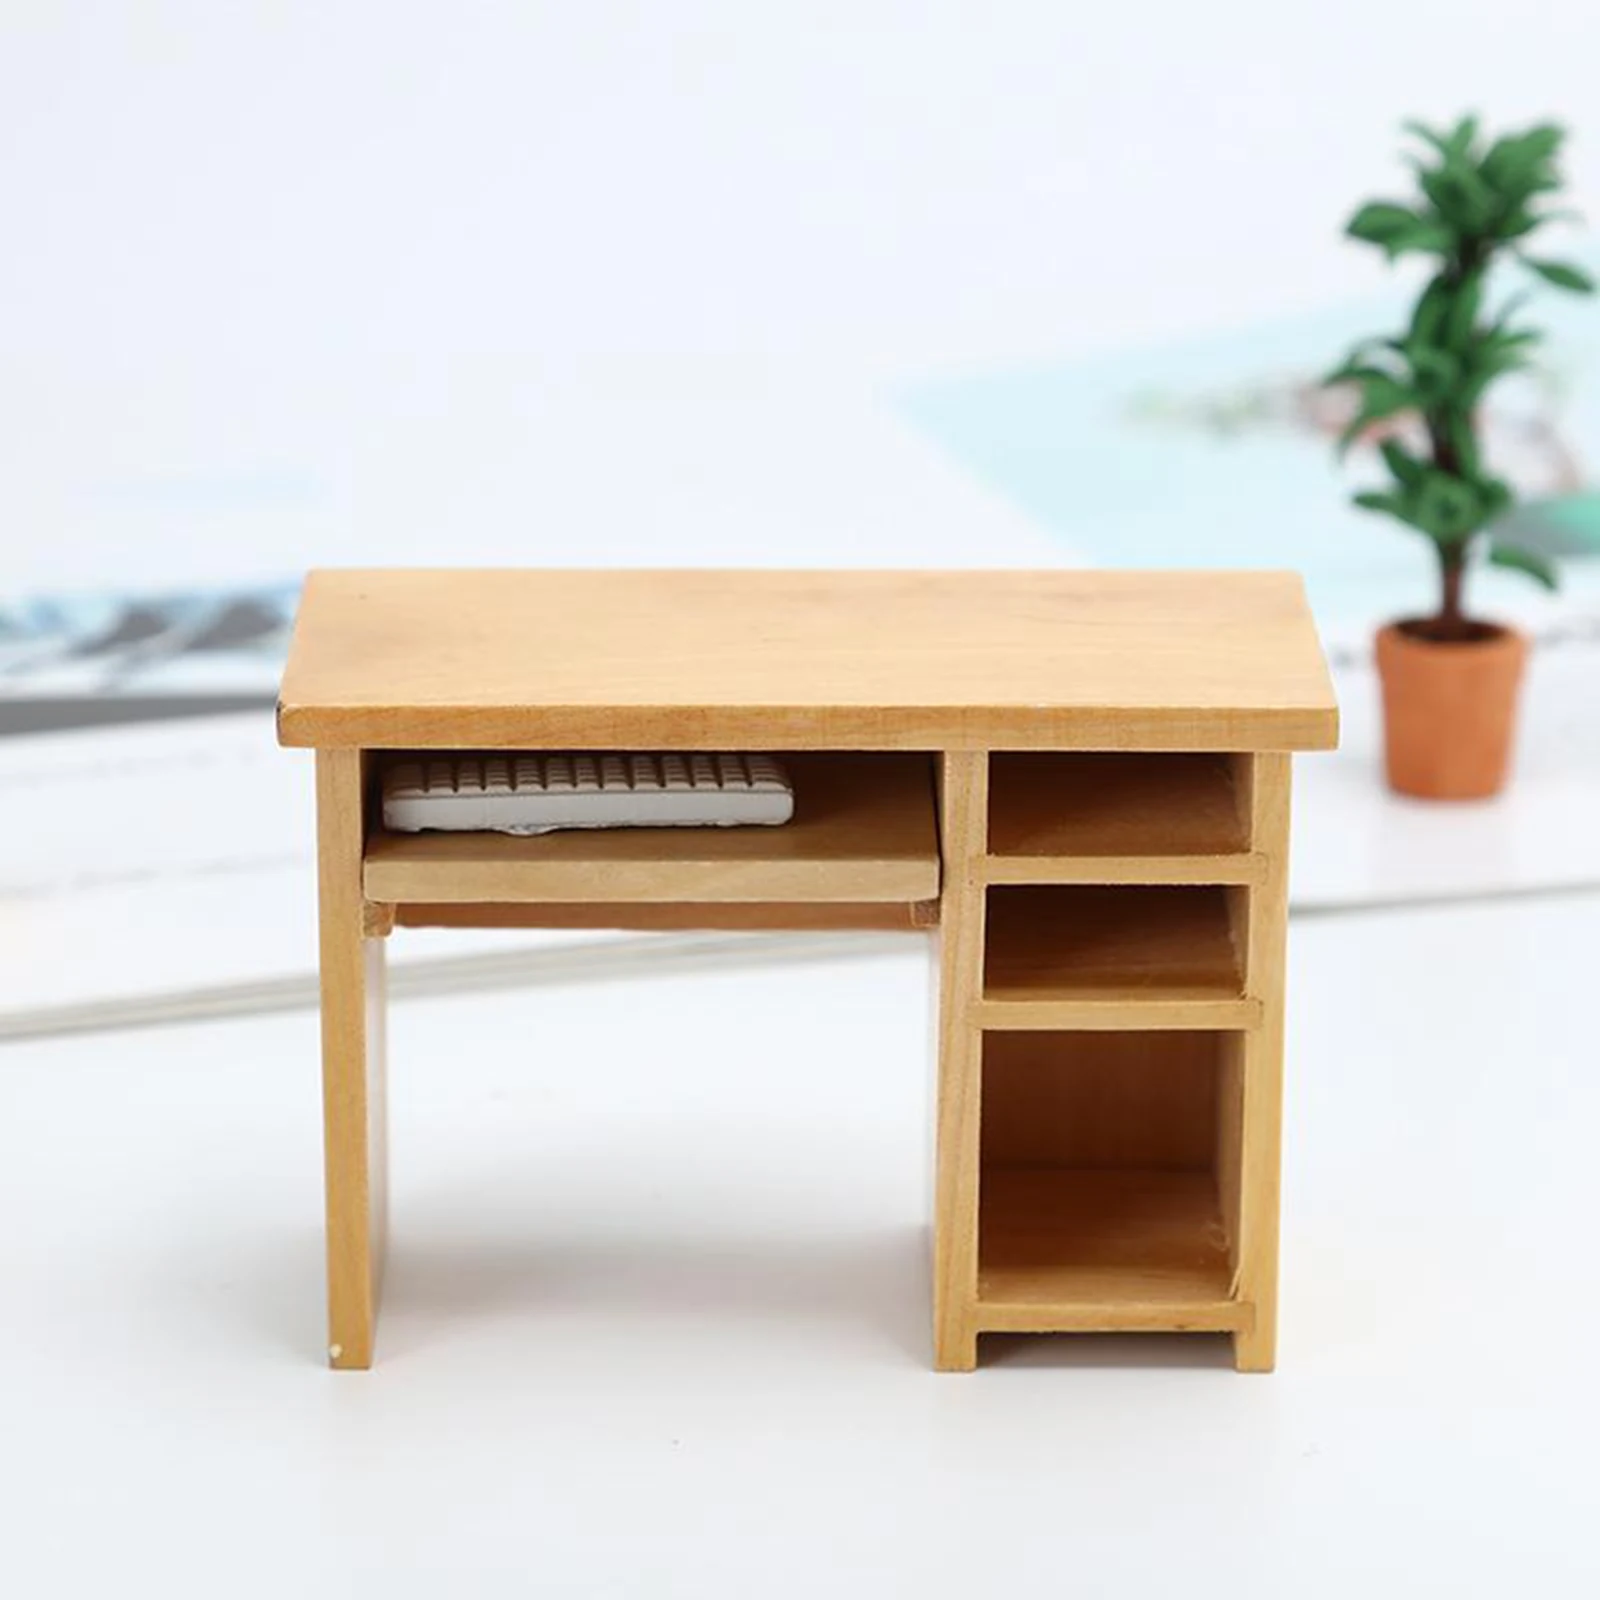 Cute Miniature Wooden Computer Desk with Mouse and Keyboard, 1:12 Scale Dollhouse Accessories Model